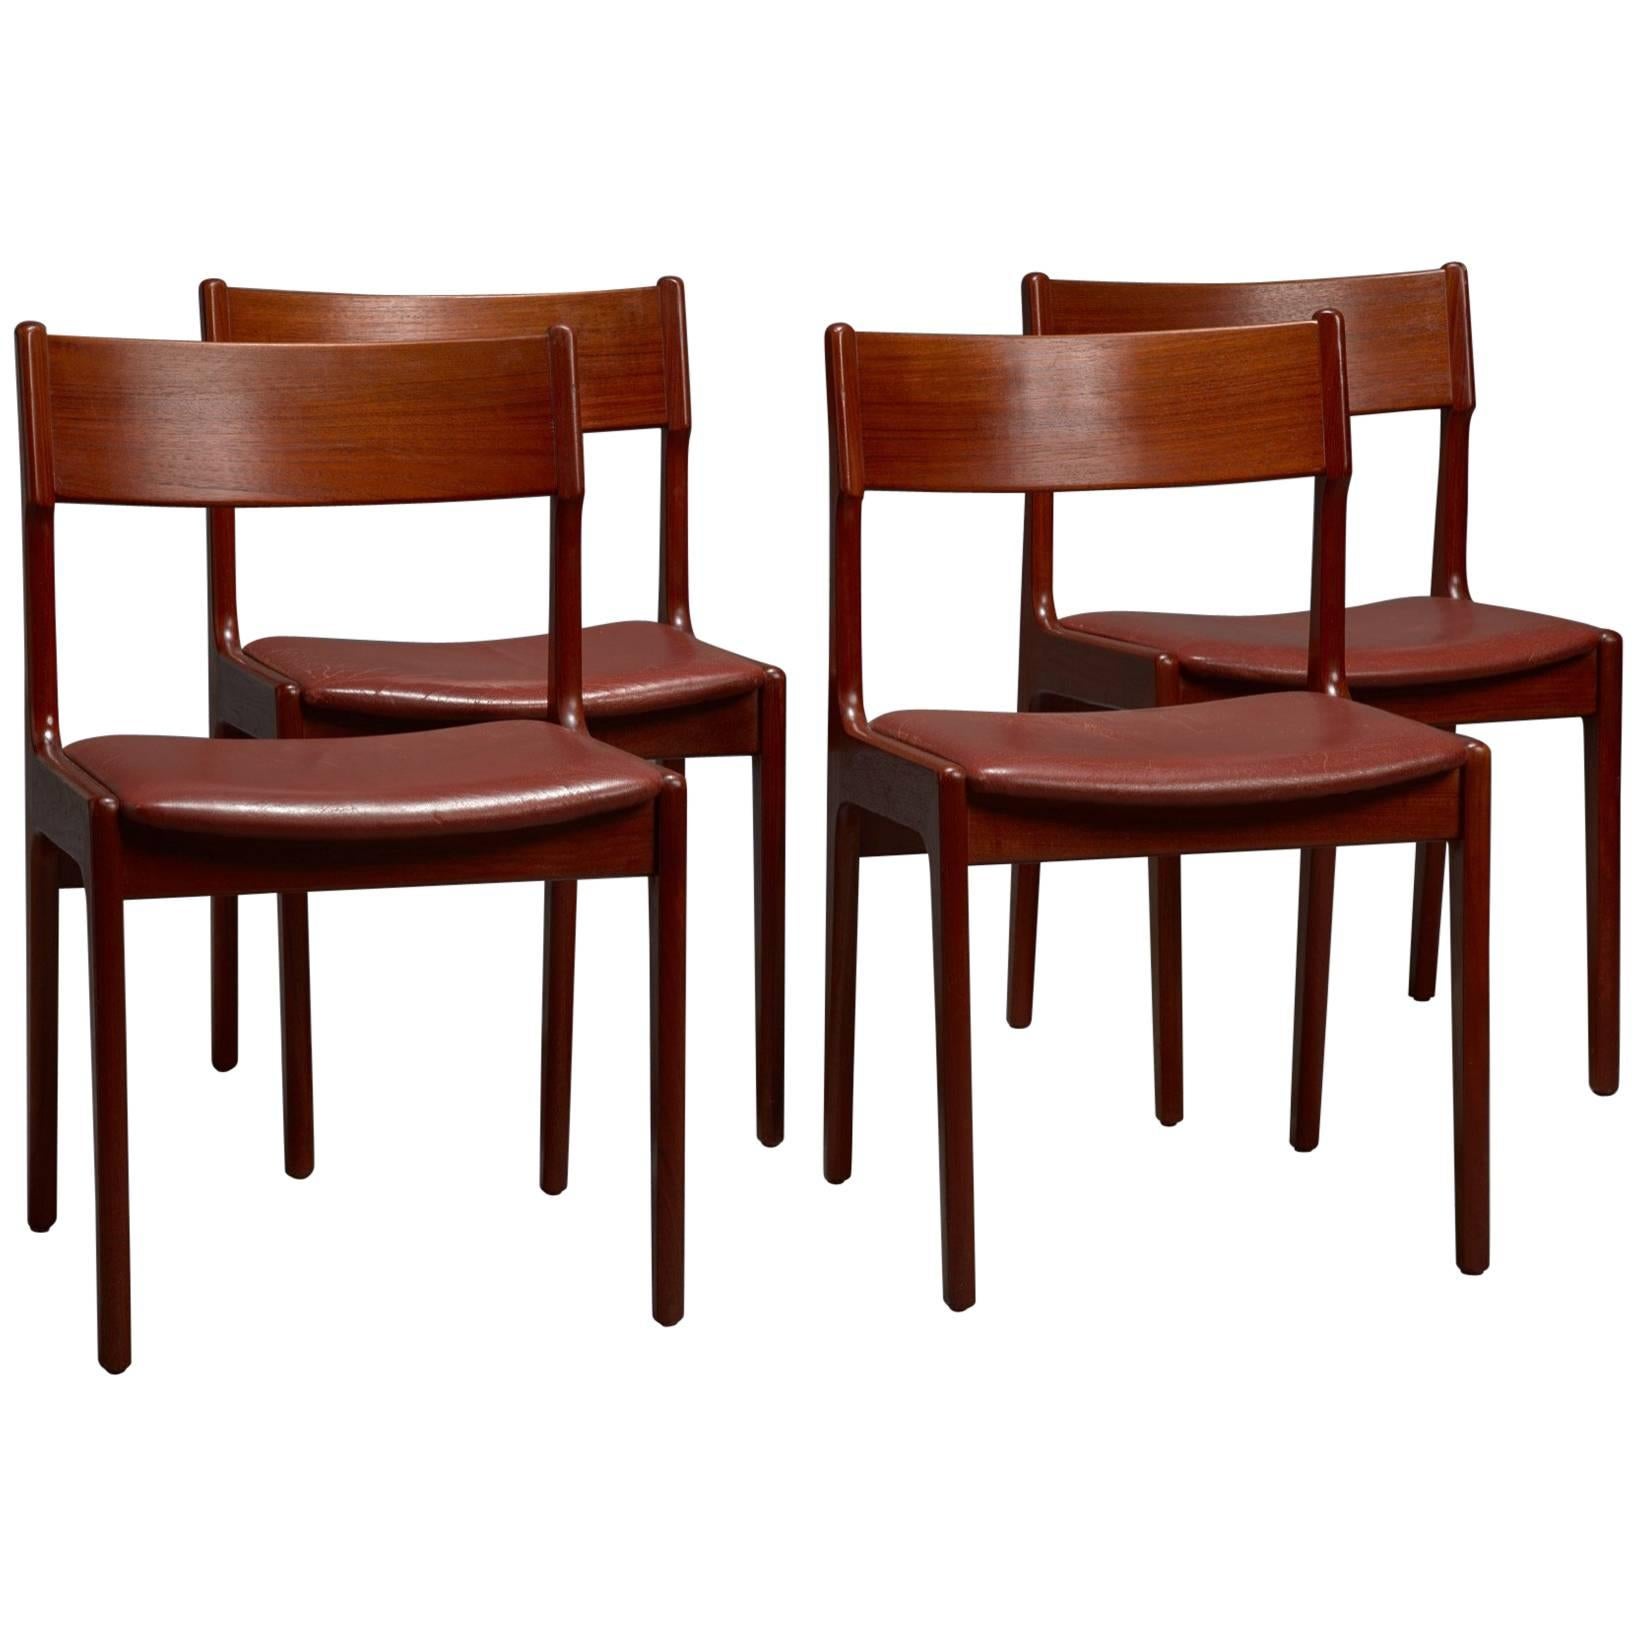 Set of Four Danish Teak and Leather Dining Chairs